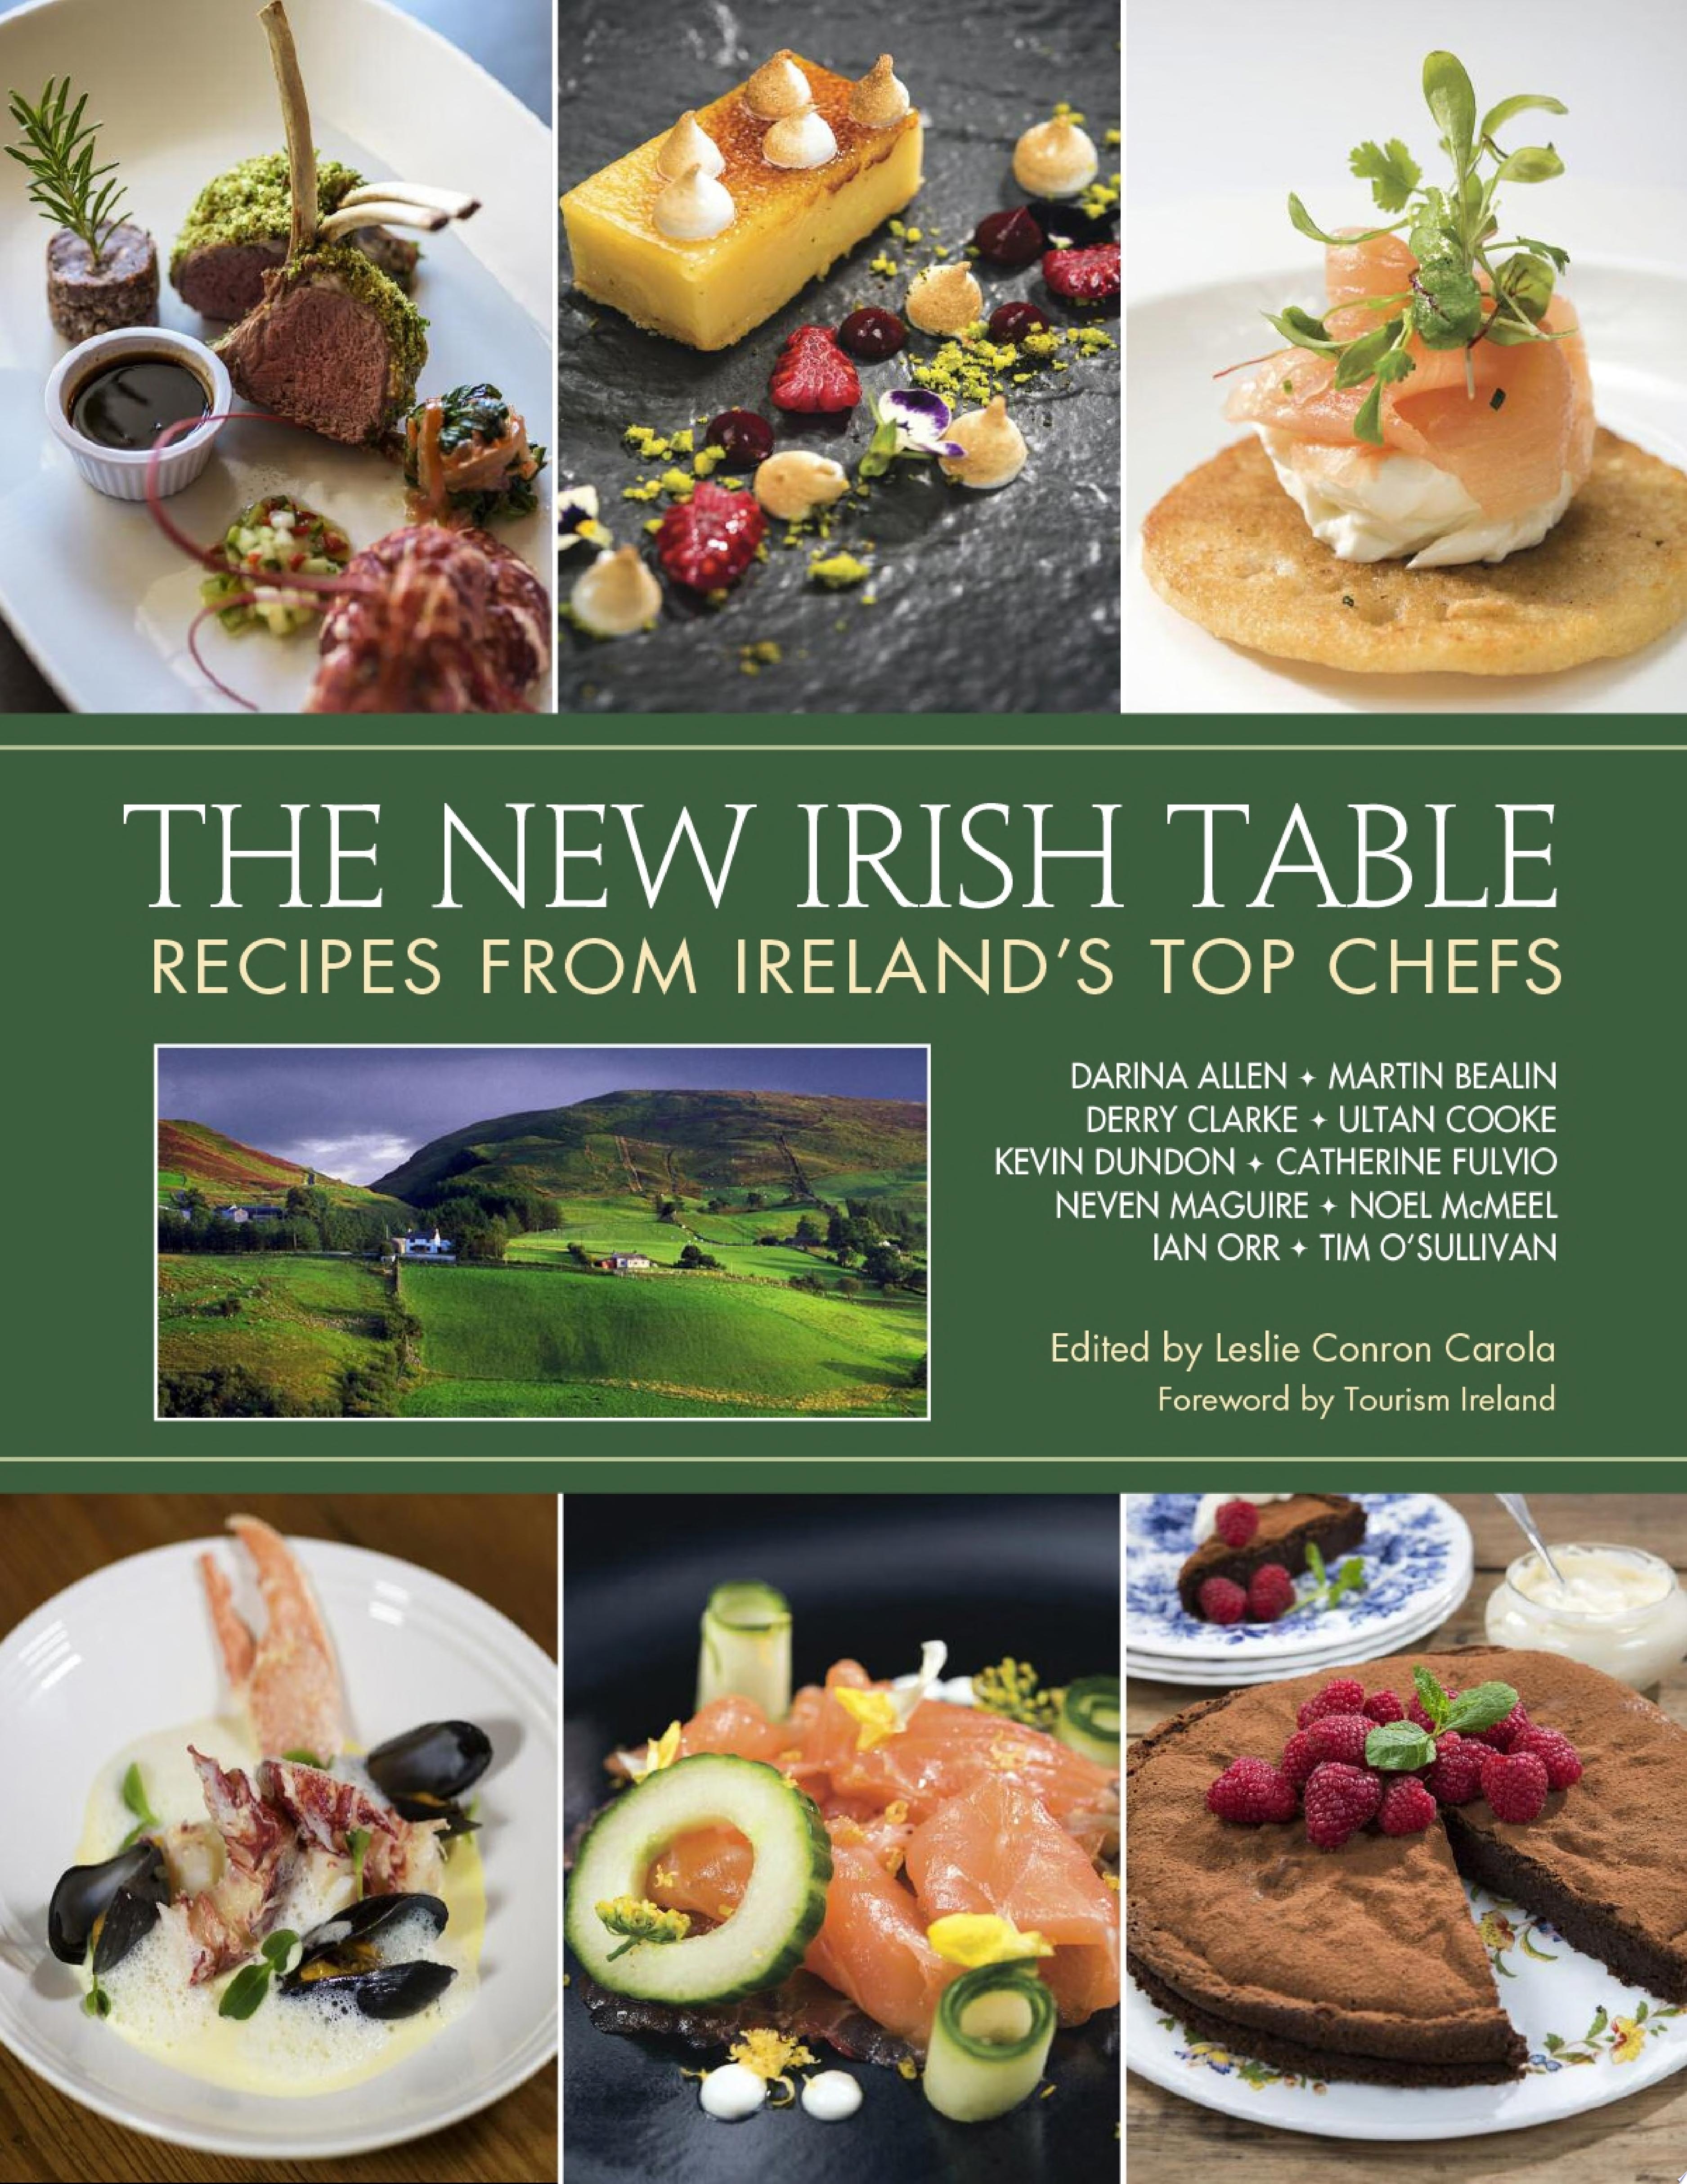 Image for "The New Irish Table"